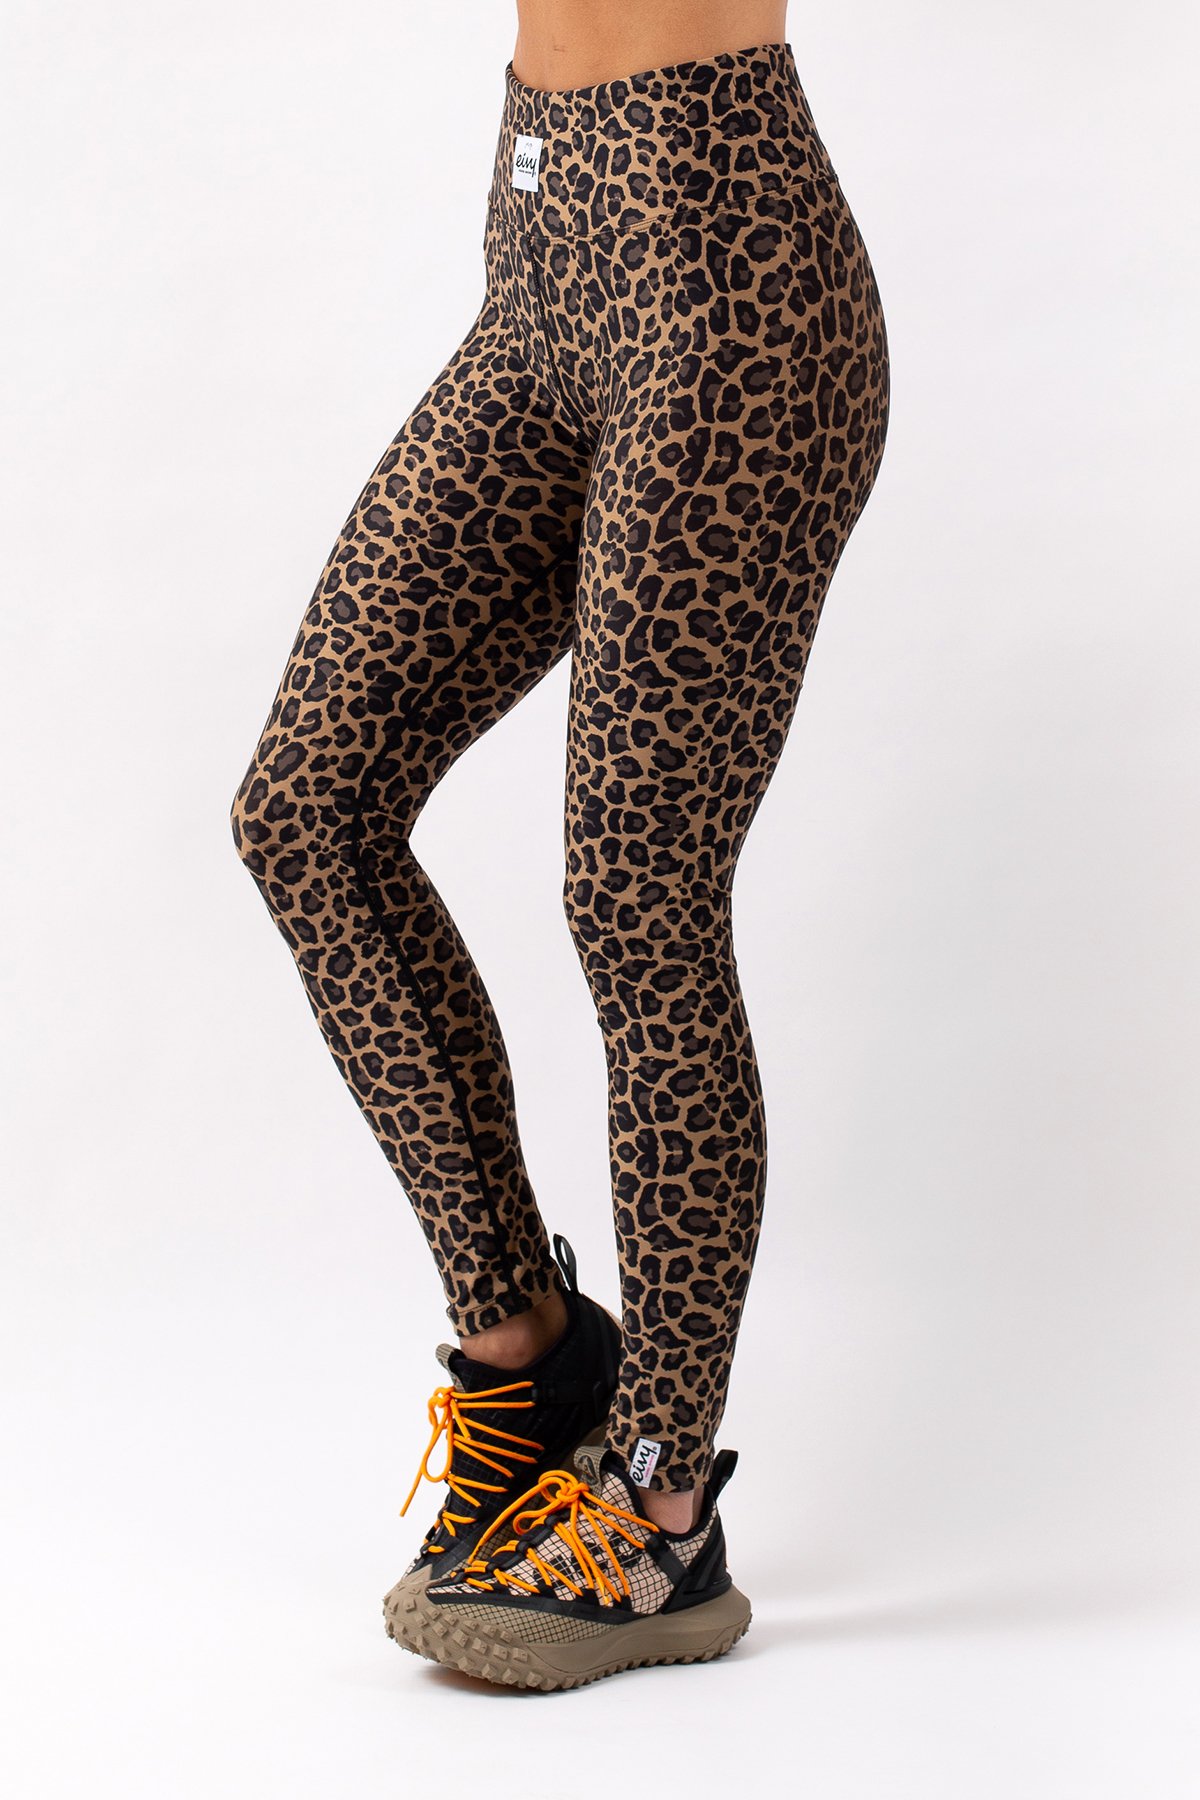 https://www.eivy.co/image/4699/Icecold-Tights-Leopard_1.jpg